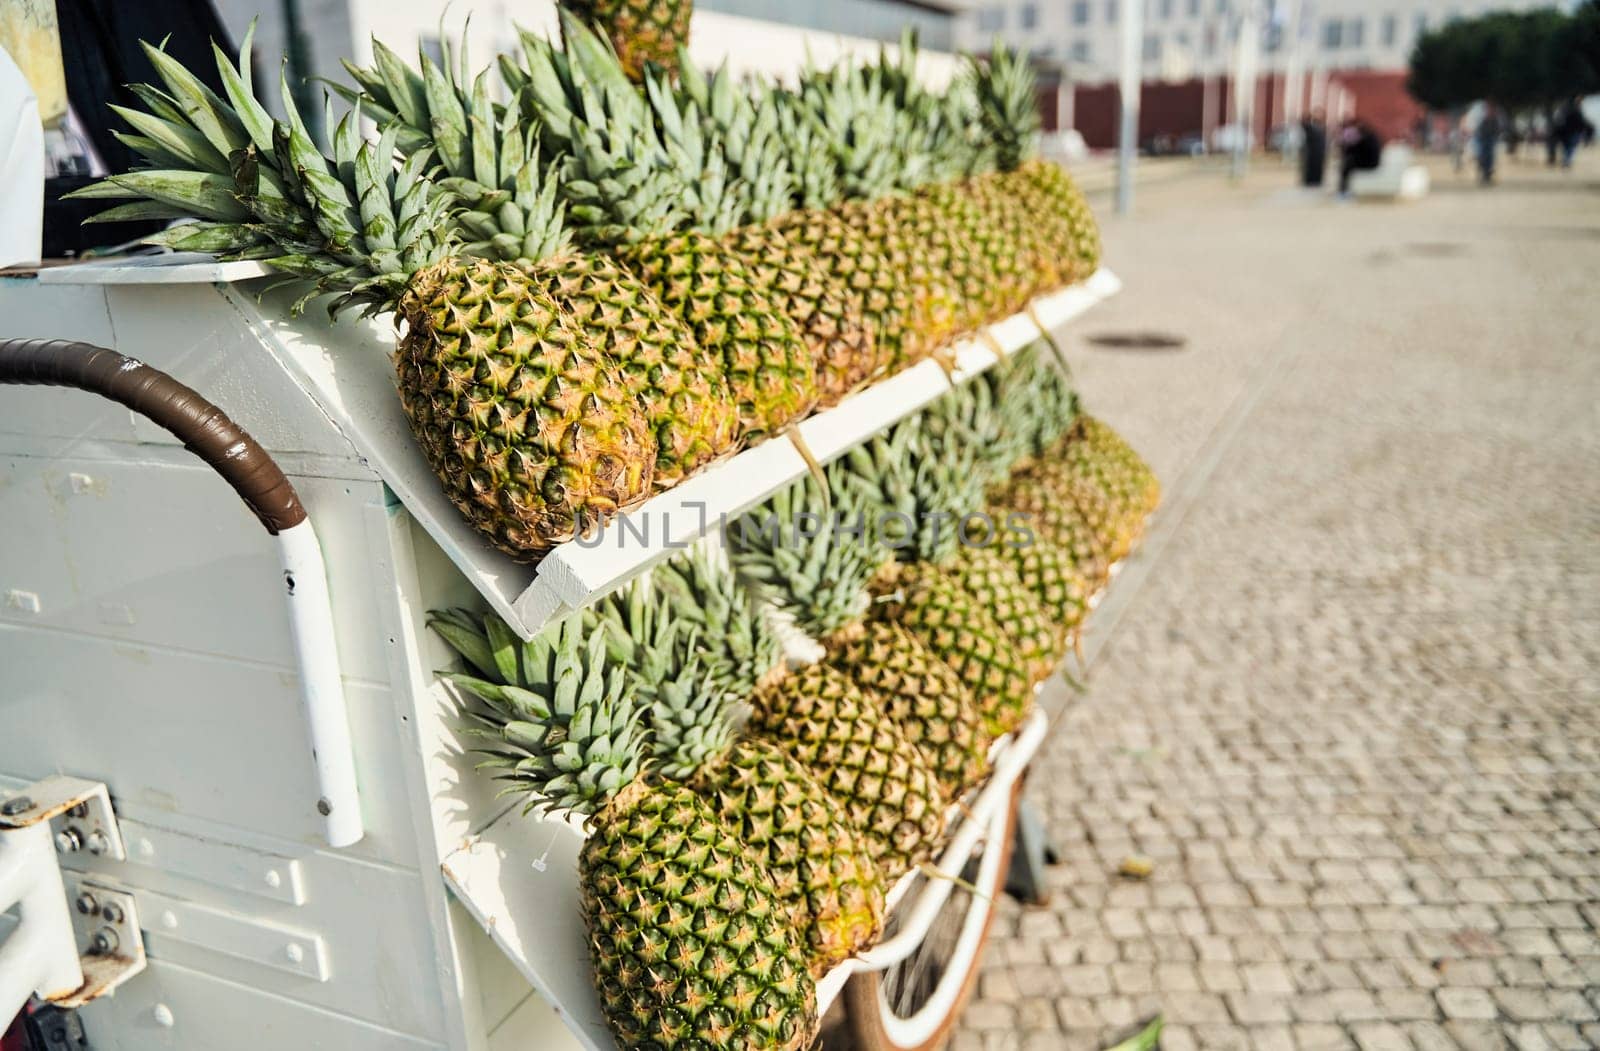 A cart filled with pineapples on a cobblestone street by driver-s